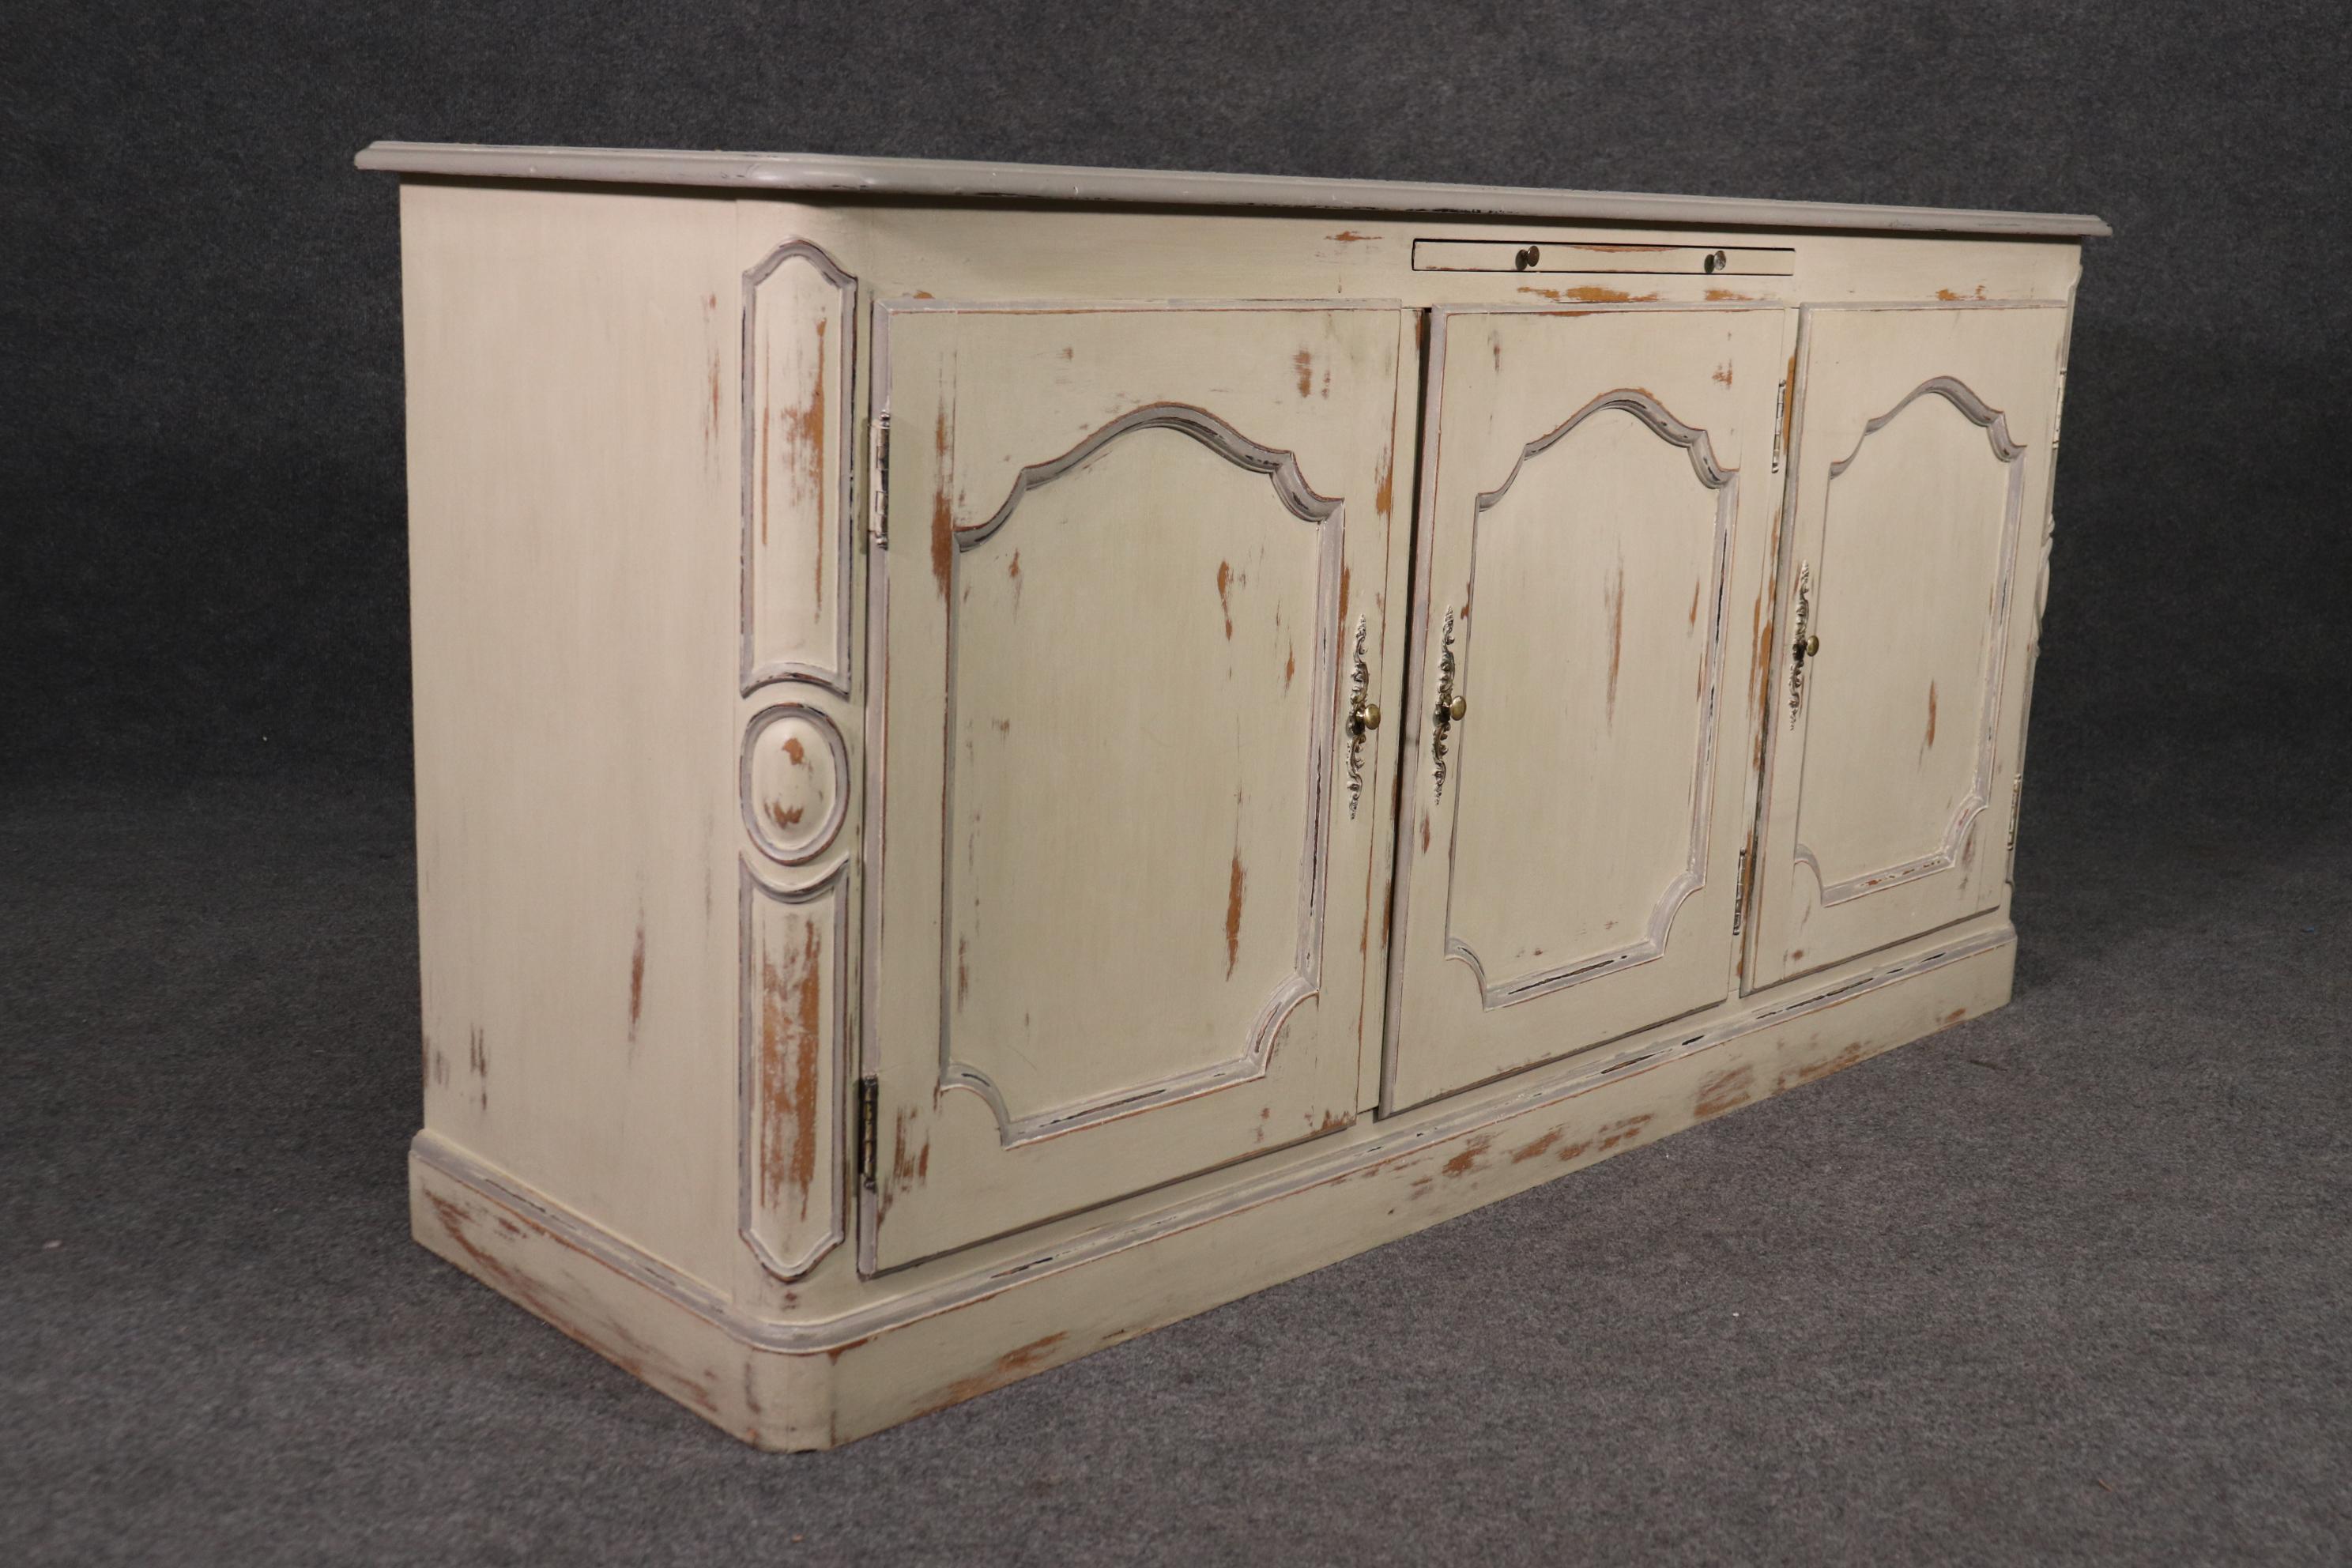 Nice paint distressed sideboard by Bodart a very high quality furniture manufactuer. The sideboard is intentionally distressed. Measures 66 wide x 33 tall x 21 deep.